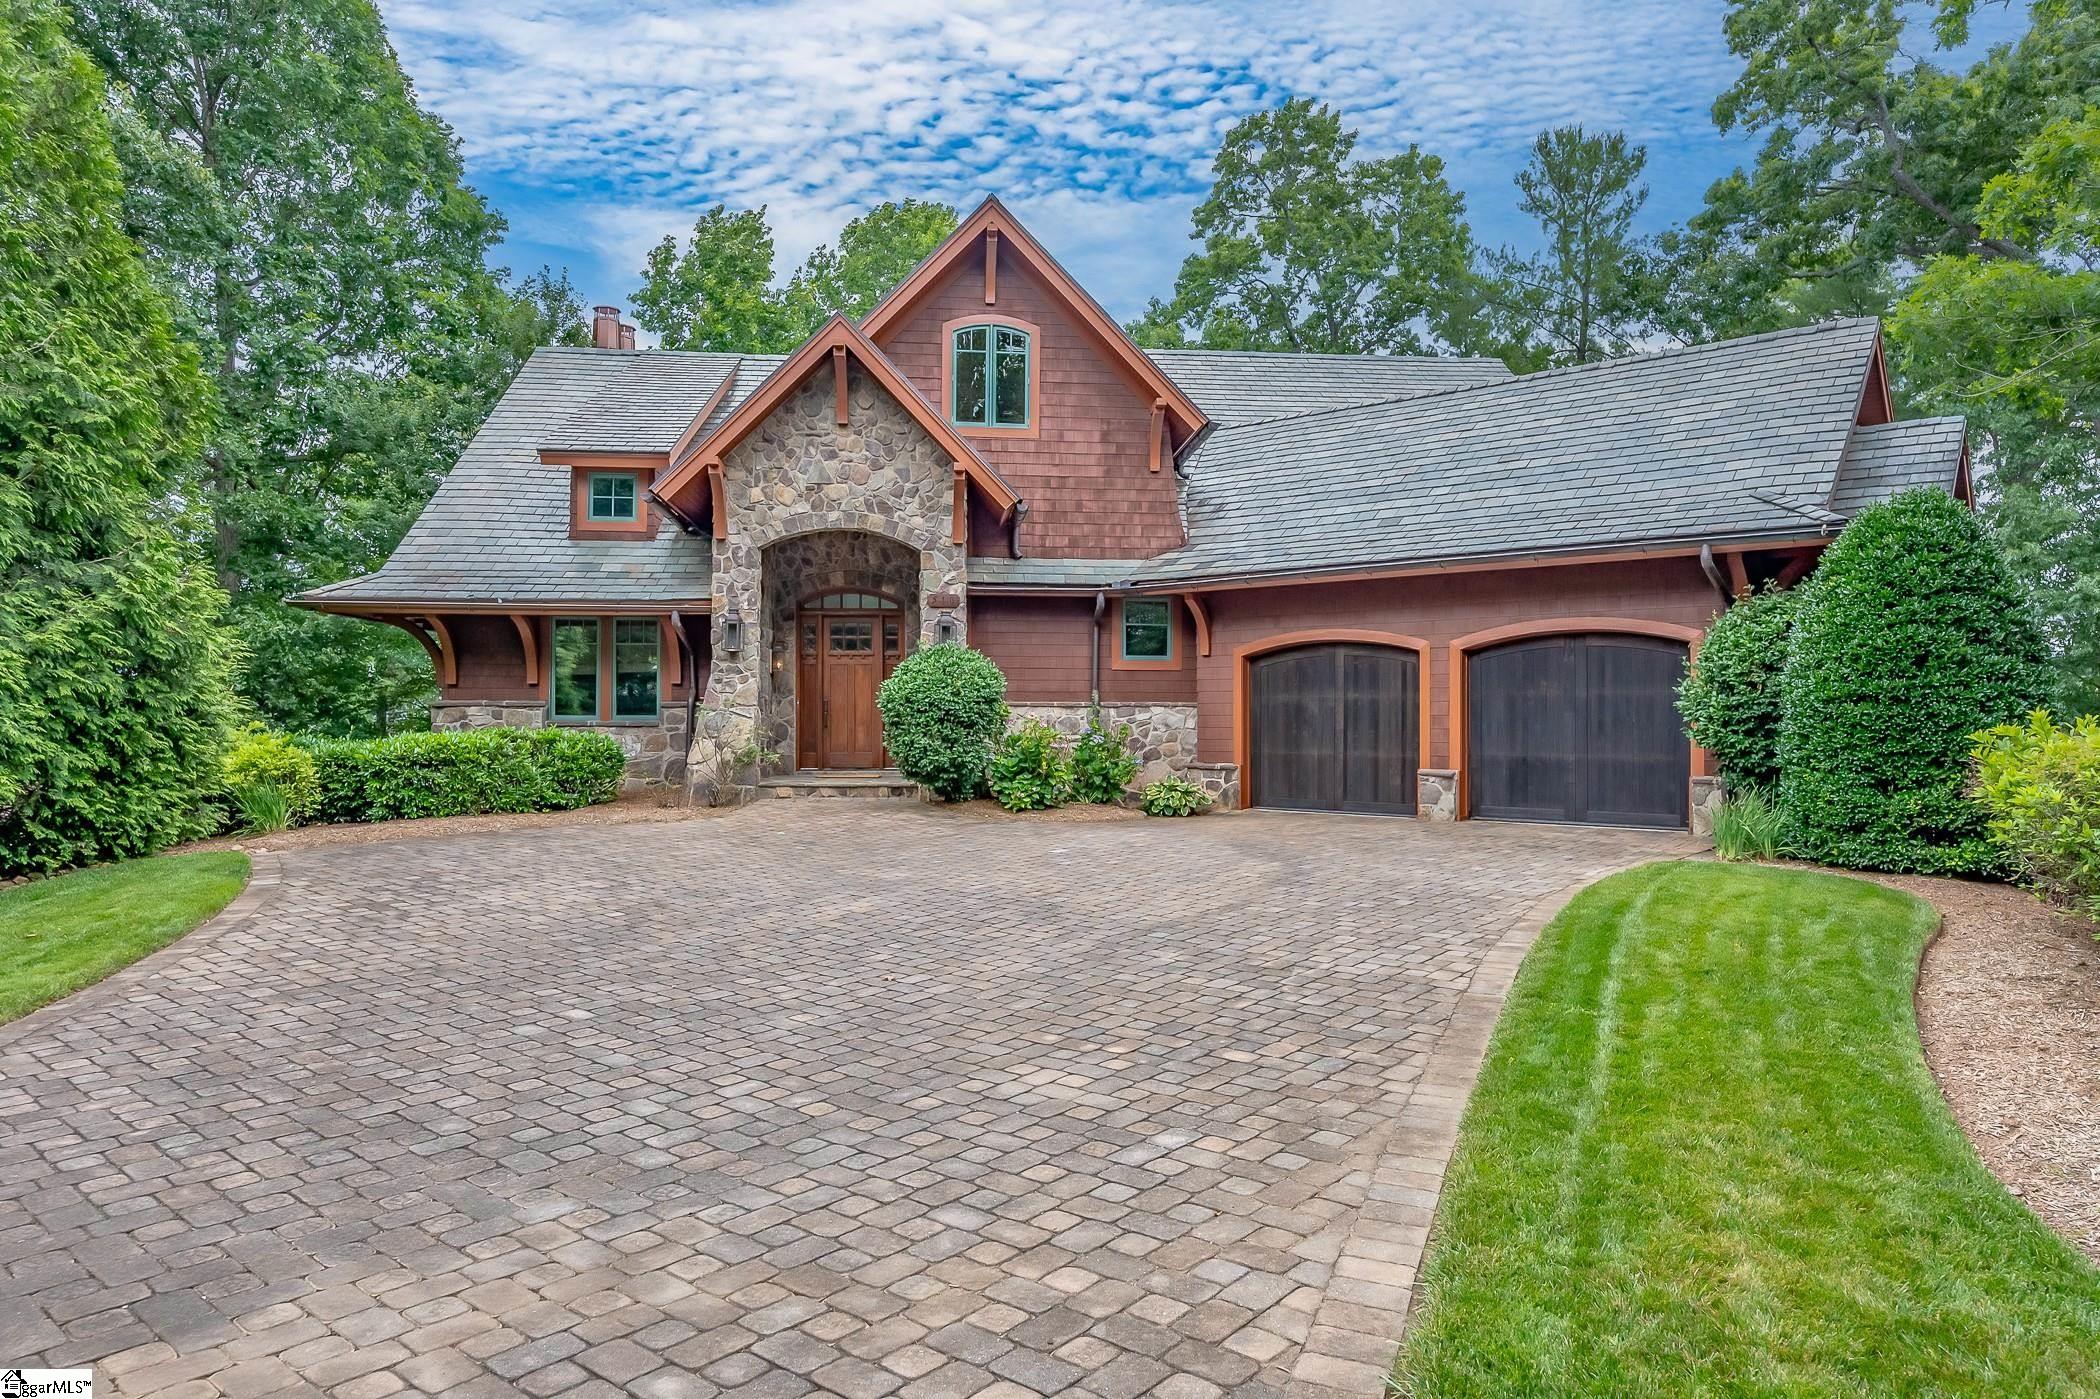 An inviting flat driveway of stone pavers leads to this premier property, located at the end of a cul-de-sac in the highly desirable Cliffs at Keowee Springs community. You are instantly greeted with a harmonious blend of elements, between the wooden arched doors of the two car garage and a storybook-like stone entrance flanked by gas lanterns. Inside the home you'll find an entryway with a soaring two-story ceiling, a wooden platform staircase, and stone tile flooring in different shades of earth tones - leading to the great room. This rich center of the home connects the living area to the formal dining space, screened-in grilling patio, and chef's kitchen with barstools seamlessly. The great room boasts a vaulted beamed ceiling, gas fireplace, custom built bookshelves, ample space for seating and lake and mountain views.Culinarians will delight in the gourmet kitchen. Equipped with a Thermador oven and six gas burner cooktop, Miele dishwasher and Sub-Zero refrigerator/freezer (both appliances camouflaged by custom wood paneling), a built-in Miele steam oven, built-in Miele coffee maker, and a Sharp Insight Pro Microwave drawer, you'll find that style meets function. Every detail has been thought of - from the deep kitchen sink with copper insert, additional cocktail sink in the center prep island, water spicket for filling pots located above the cooktop, soft closing kitchen drawers, and a spacious walk-in pantry. An expansive angled granite high-top counter wraps around the space where family and friends can gather at the opposing bar stools for casual dining and fun. Adjacent to the kitchen is the dining room with doors that lead to the screened porch. A palatial beamed ceiling adorns this stone patio, featuring a 2-story gas fireplace, additional dining area, and built-in grilling station with a copper hood. A slender door from the screened porch provides immediate access to the master suite, located intentionally on this floor for the convenience of 'main level living.' Awake here to long lake and mountain views from the floor to ceiling glass doors that open to a second, separate and private stone balcony. The master bathroom features a deep soaking copper tub, walk-in shower, dual vanities with sinks, and a separate water closet. Also on this floor you'll find a guest suite with its own full bath and a laundry room with custom cabinetry and a porcelain sink. The second upper floor provides an additional guest suite.  The life-style rich lower level includes a wine cellar with tailor made shelving, carpeted movie/media lounge with wall-mounted Jamo speakers, lake room with storage, a full wet bar including a microwave, sink, mini fridge, ice maker, and dishwasher - all complemented by an antiqued copper backsplash. Two additional suites with full bathrooms will wow your guests with calming lake vistas. The terrace level stone patio captivates with main channel views while the covered dock with boat slip is conveniently located to the side of the home, providing tranquil cove privacy. A pebble stone irrigation path winds through the beautifully landscaped grassy regions. An enviably easy walk leads to a covered dock with boat slip, sun deck, and swim ladder. Deep clear water in this private cove, protected from the main channel by a small island, creates a secure spot for swimming. This elegant five bedroom, five bathroom craftsman home also has a Cliff's membership available for separate purchase. Situated a short walking distance to the popular Cliffs Beach Club, you'll find a seasonal lakeside restaurant and bar, pool with fountains and waterslides, stone fire pit, hammocks strung amongst the trees, sandy beach area perfect for swimming, and lake toys available for Cliffs members (at no additional cost to rent) including paddleboards, sunfish sailboats, and more. Enjoy the Cliffs amenities of seven communities for one all-inclusive membership. An exceptional lifestyle awaits you in this luxury lake haven.